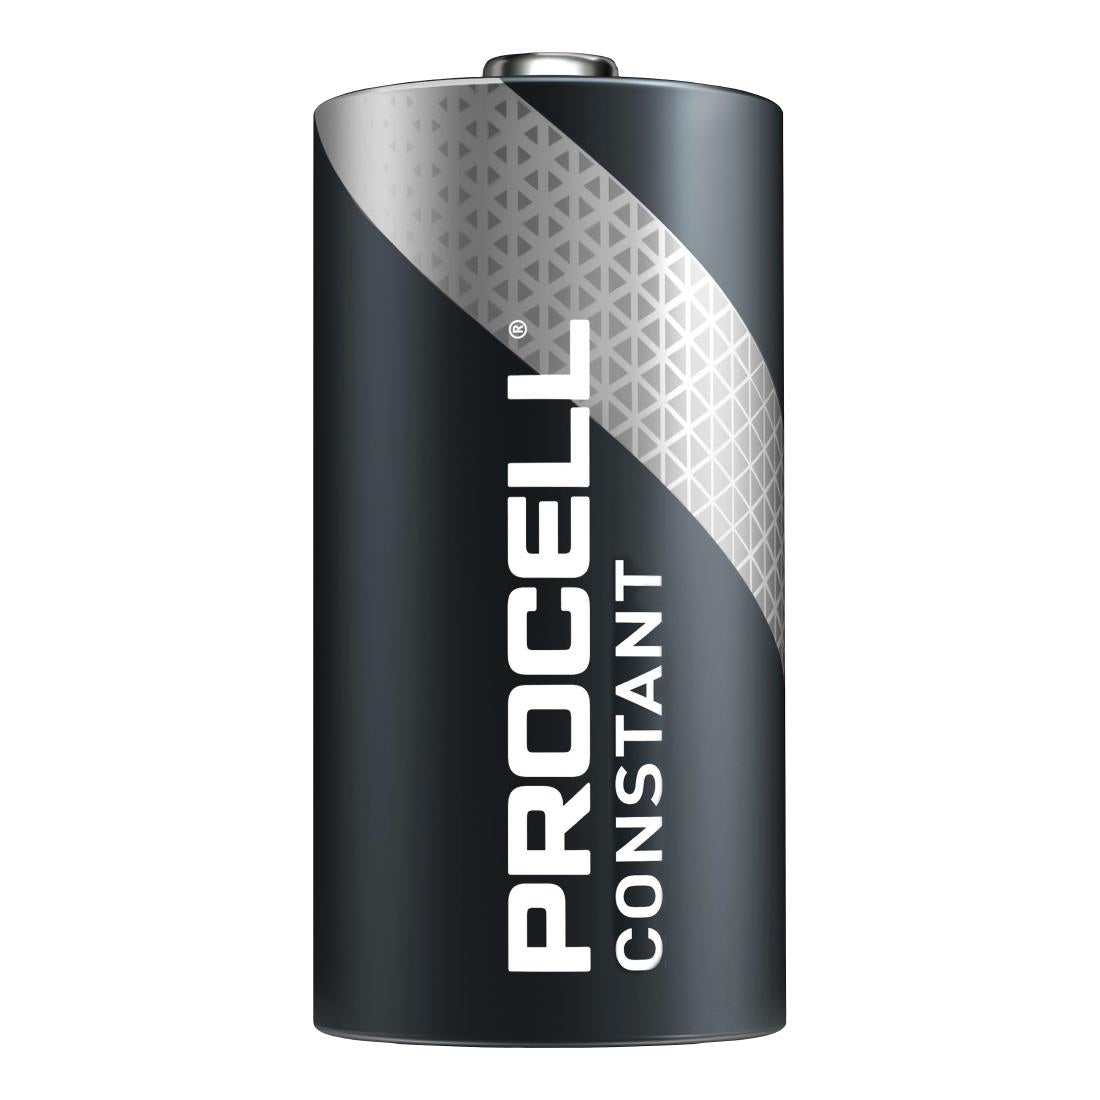 CU752 Duracell Procell Constant Power C 1.5V Battery (Pack of 10) JD Catering Equipment Solutions Ltd